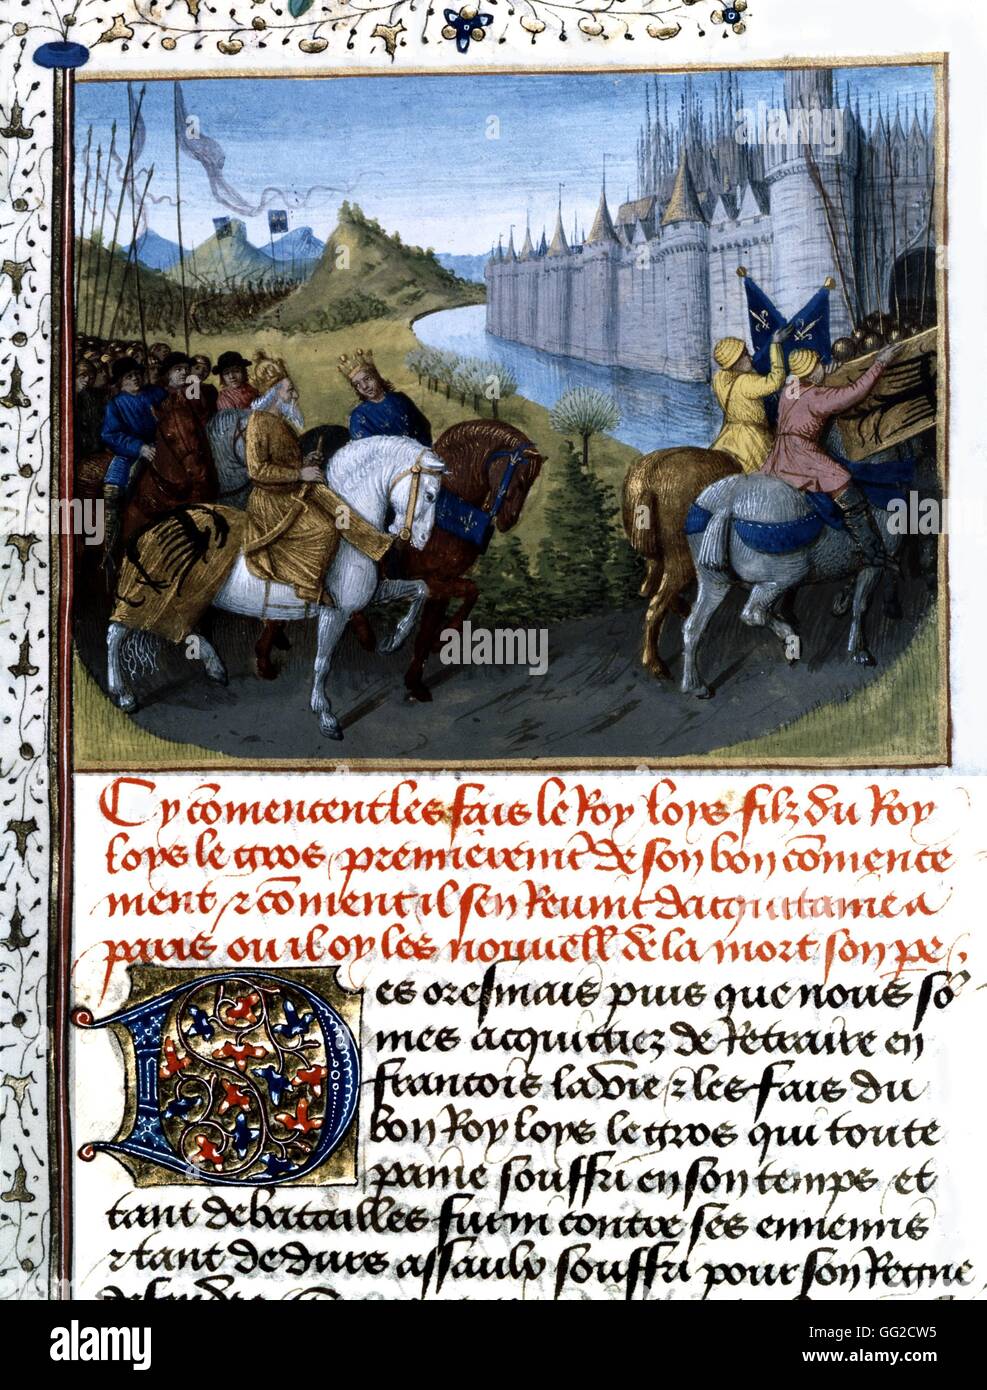 Chronicles of St. Denis. Miniature by Jean Fouquet. Louis VII (king of France from 1137 until 1180) entering Constantinople. He is accompanied by Conrad III during the crusade preached by St. Bernard, 2nd crusade  15th century France Stock Photo